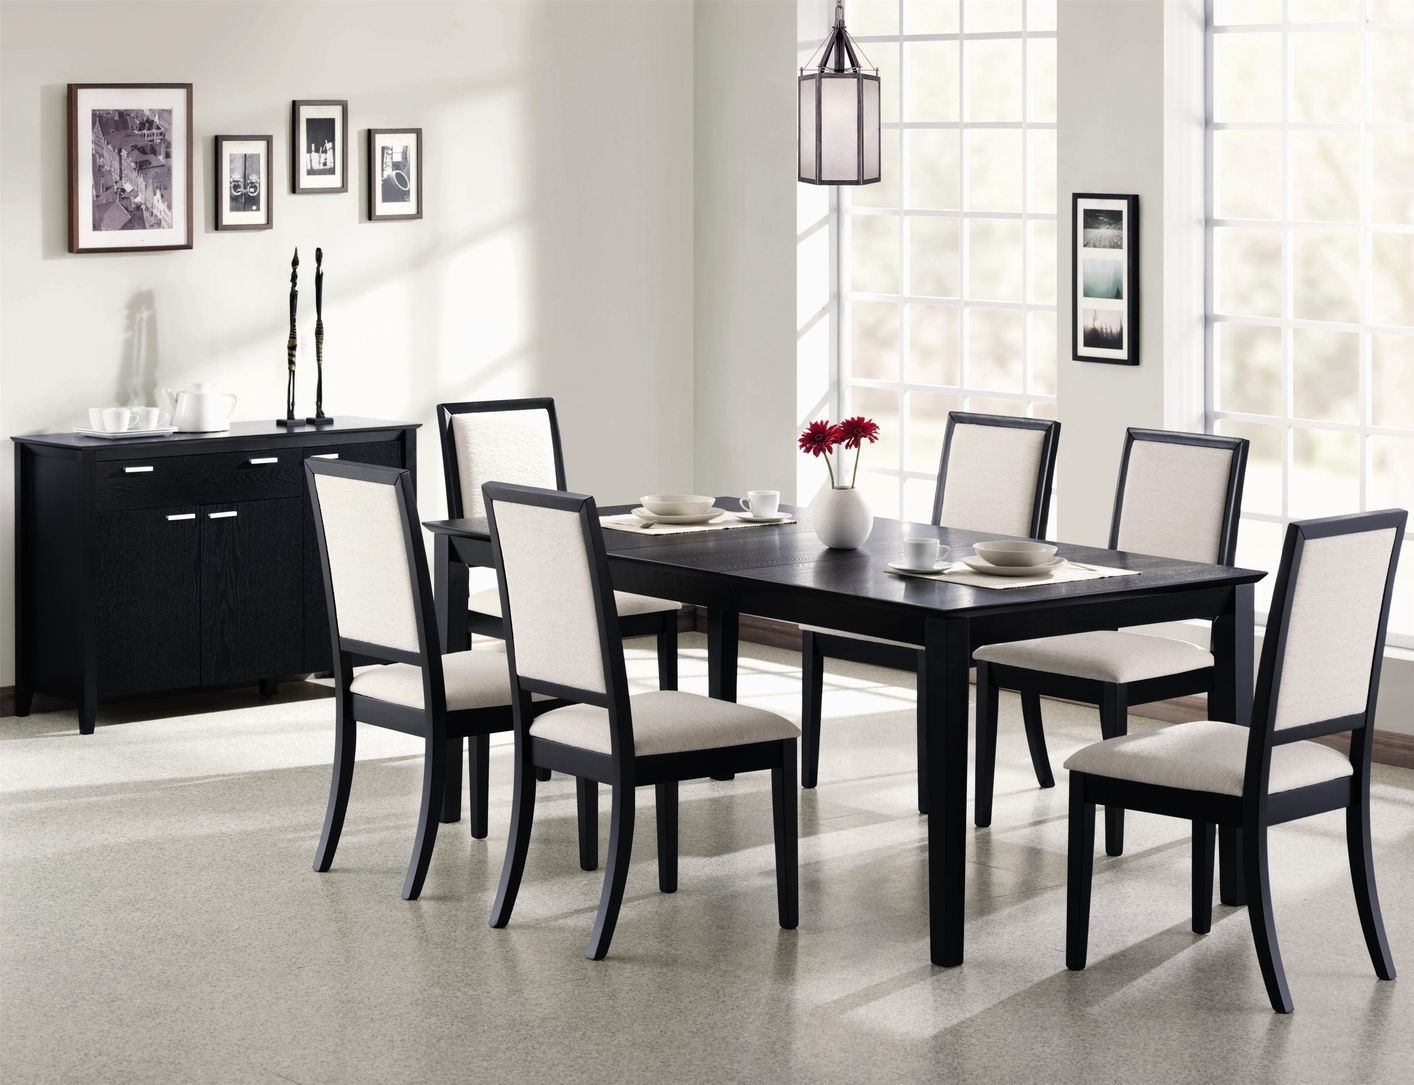 Black And White Dining Room Sets